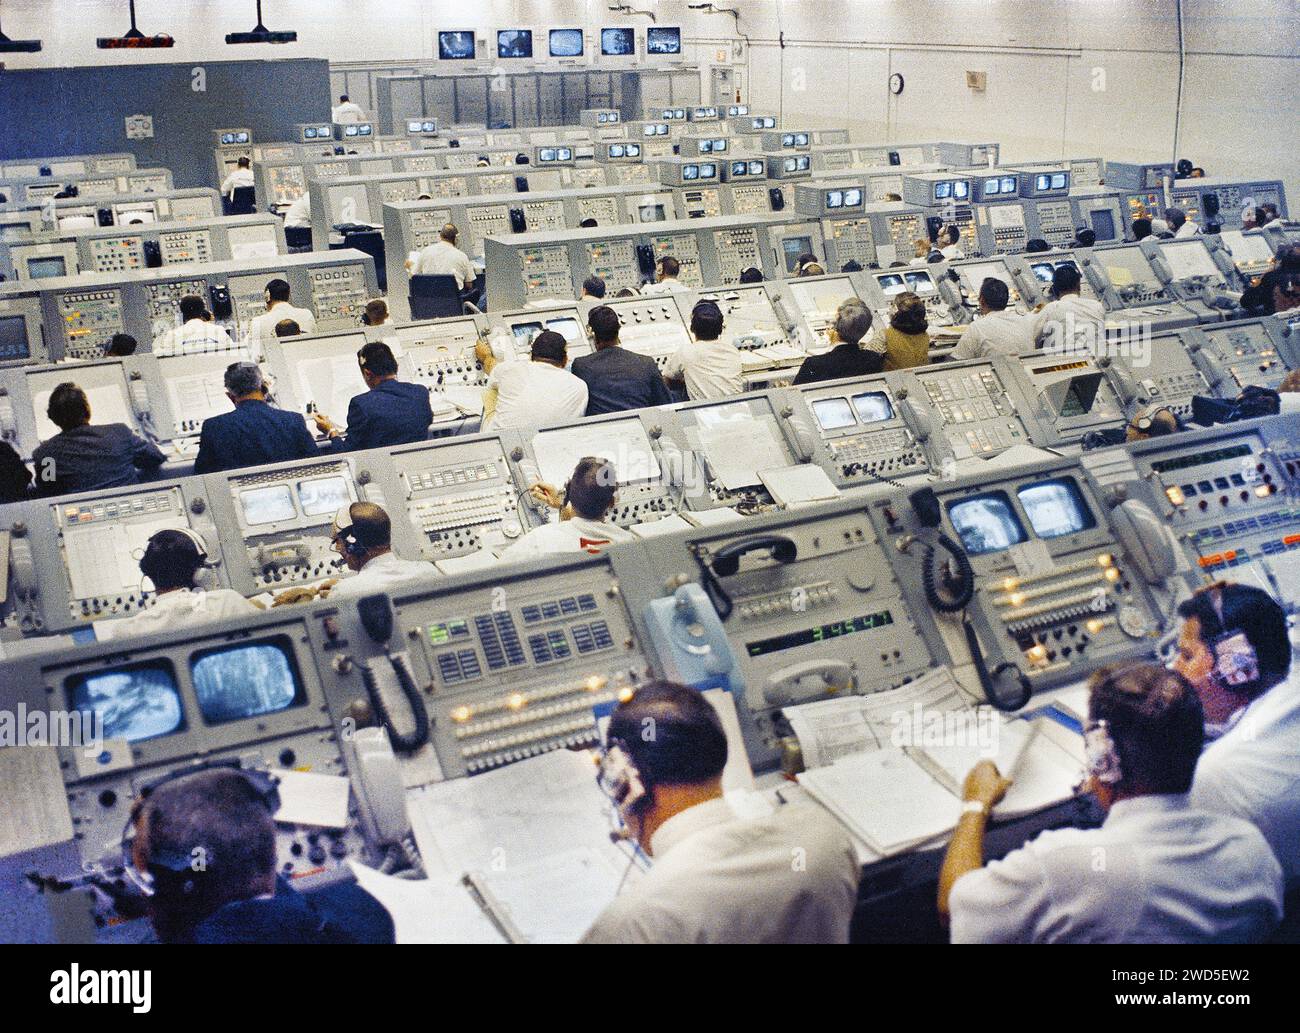 Launch Control Center during Apollo 8 mission launch activities, first manned lunar orbit mission, Kennedy Space Center, Merritt Island, Florida, USA, NASA, December 21, 1968 Stock Photo